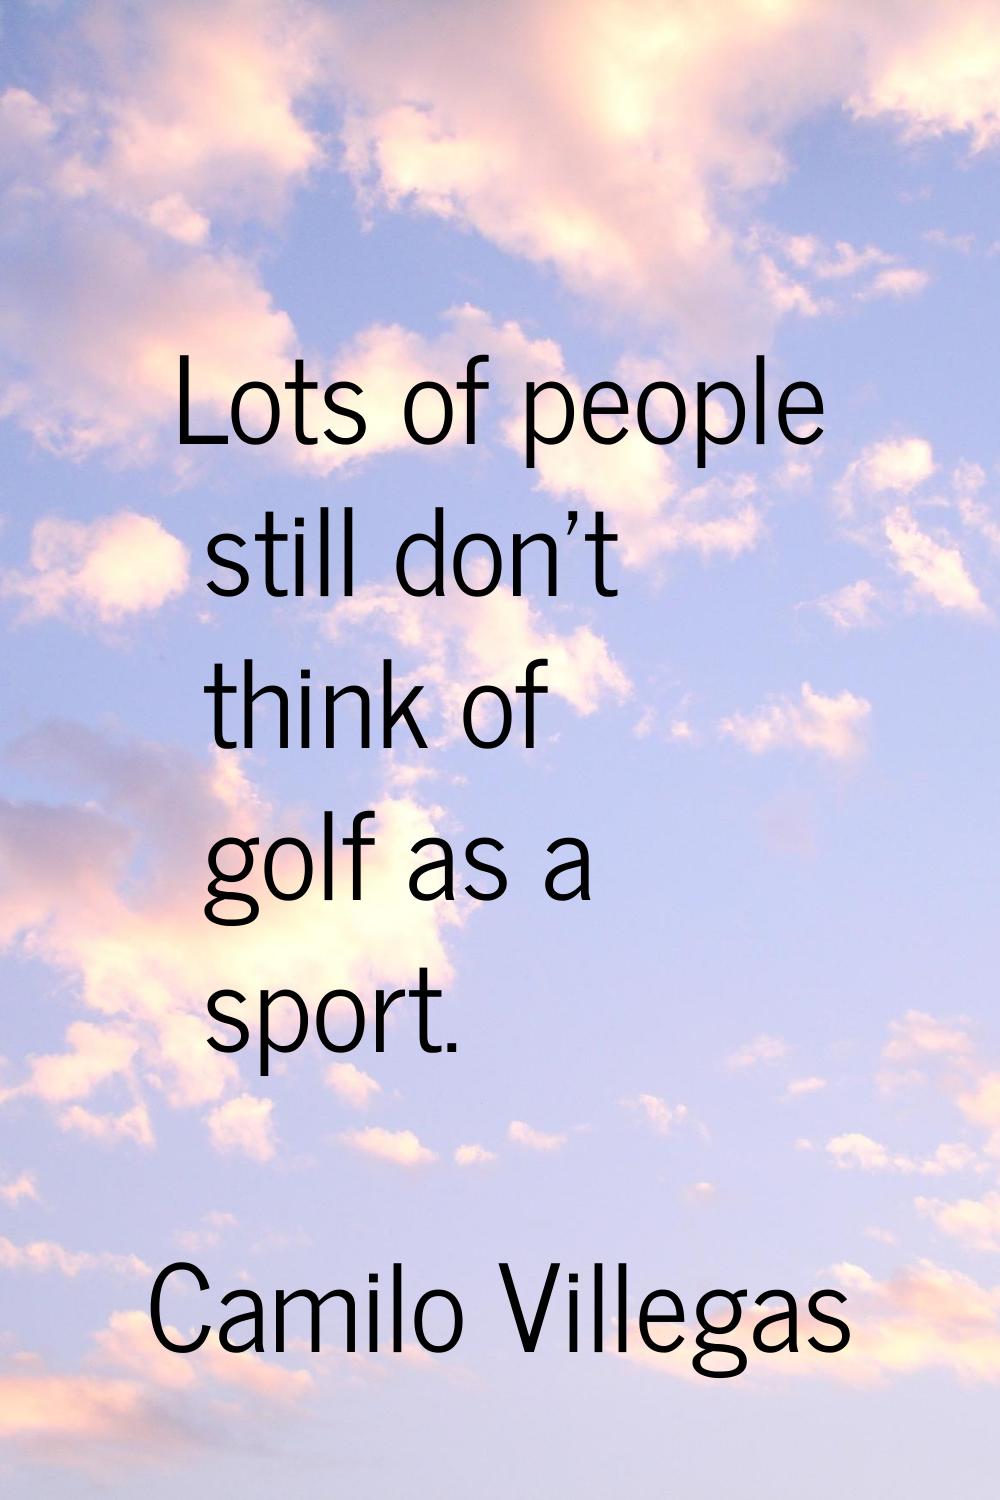 Lots of people still don't think of golf as a sport.